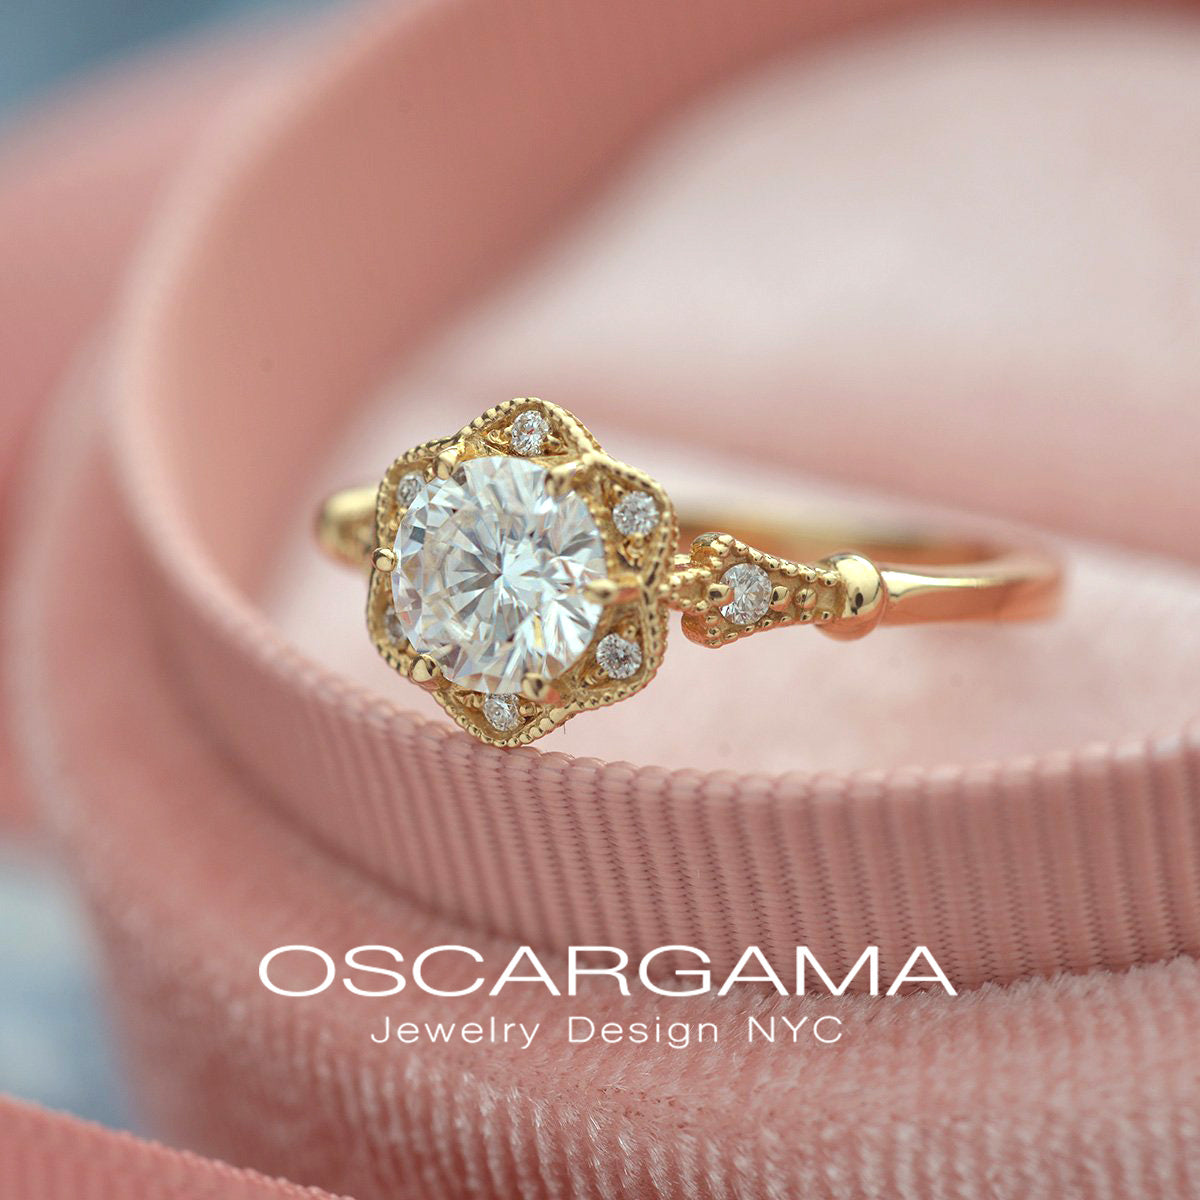 Daisy Round Halo Engagement Ring Vintage Inspired Style Bridal Set Natural Diamond GIA .30ct / 14kt Yellow Gold / Sizes 4-9 Message US Your Size